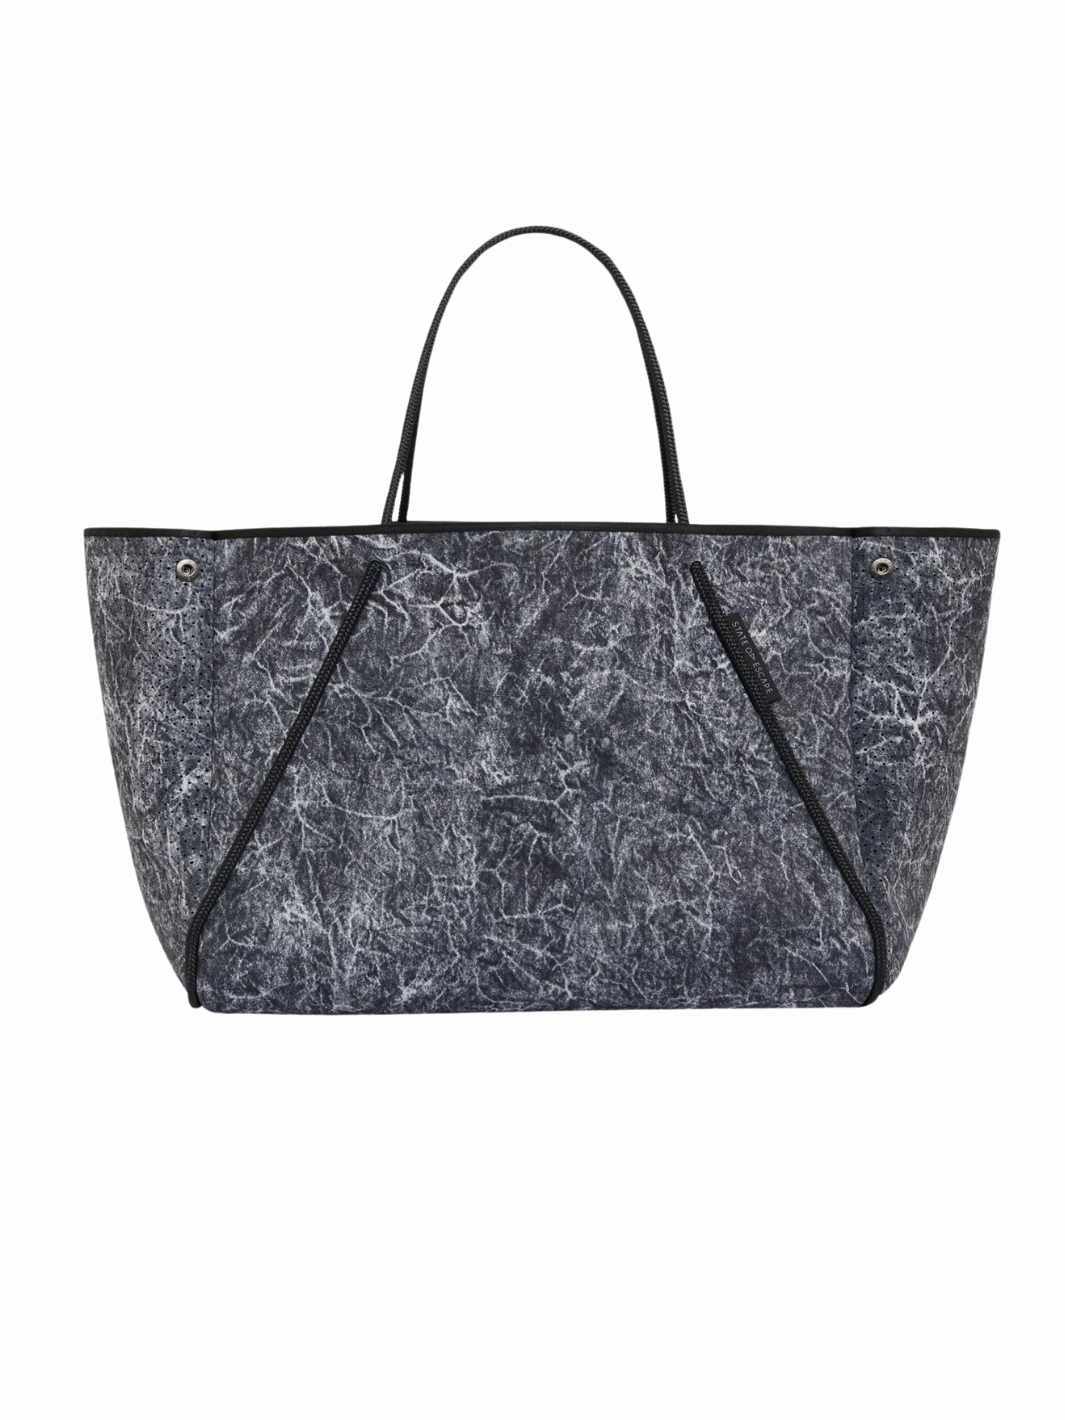 State of Escape Bags Tote Bag | Guise Tote Acid Washed Black